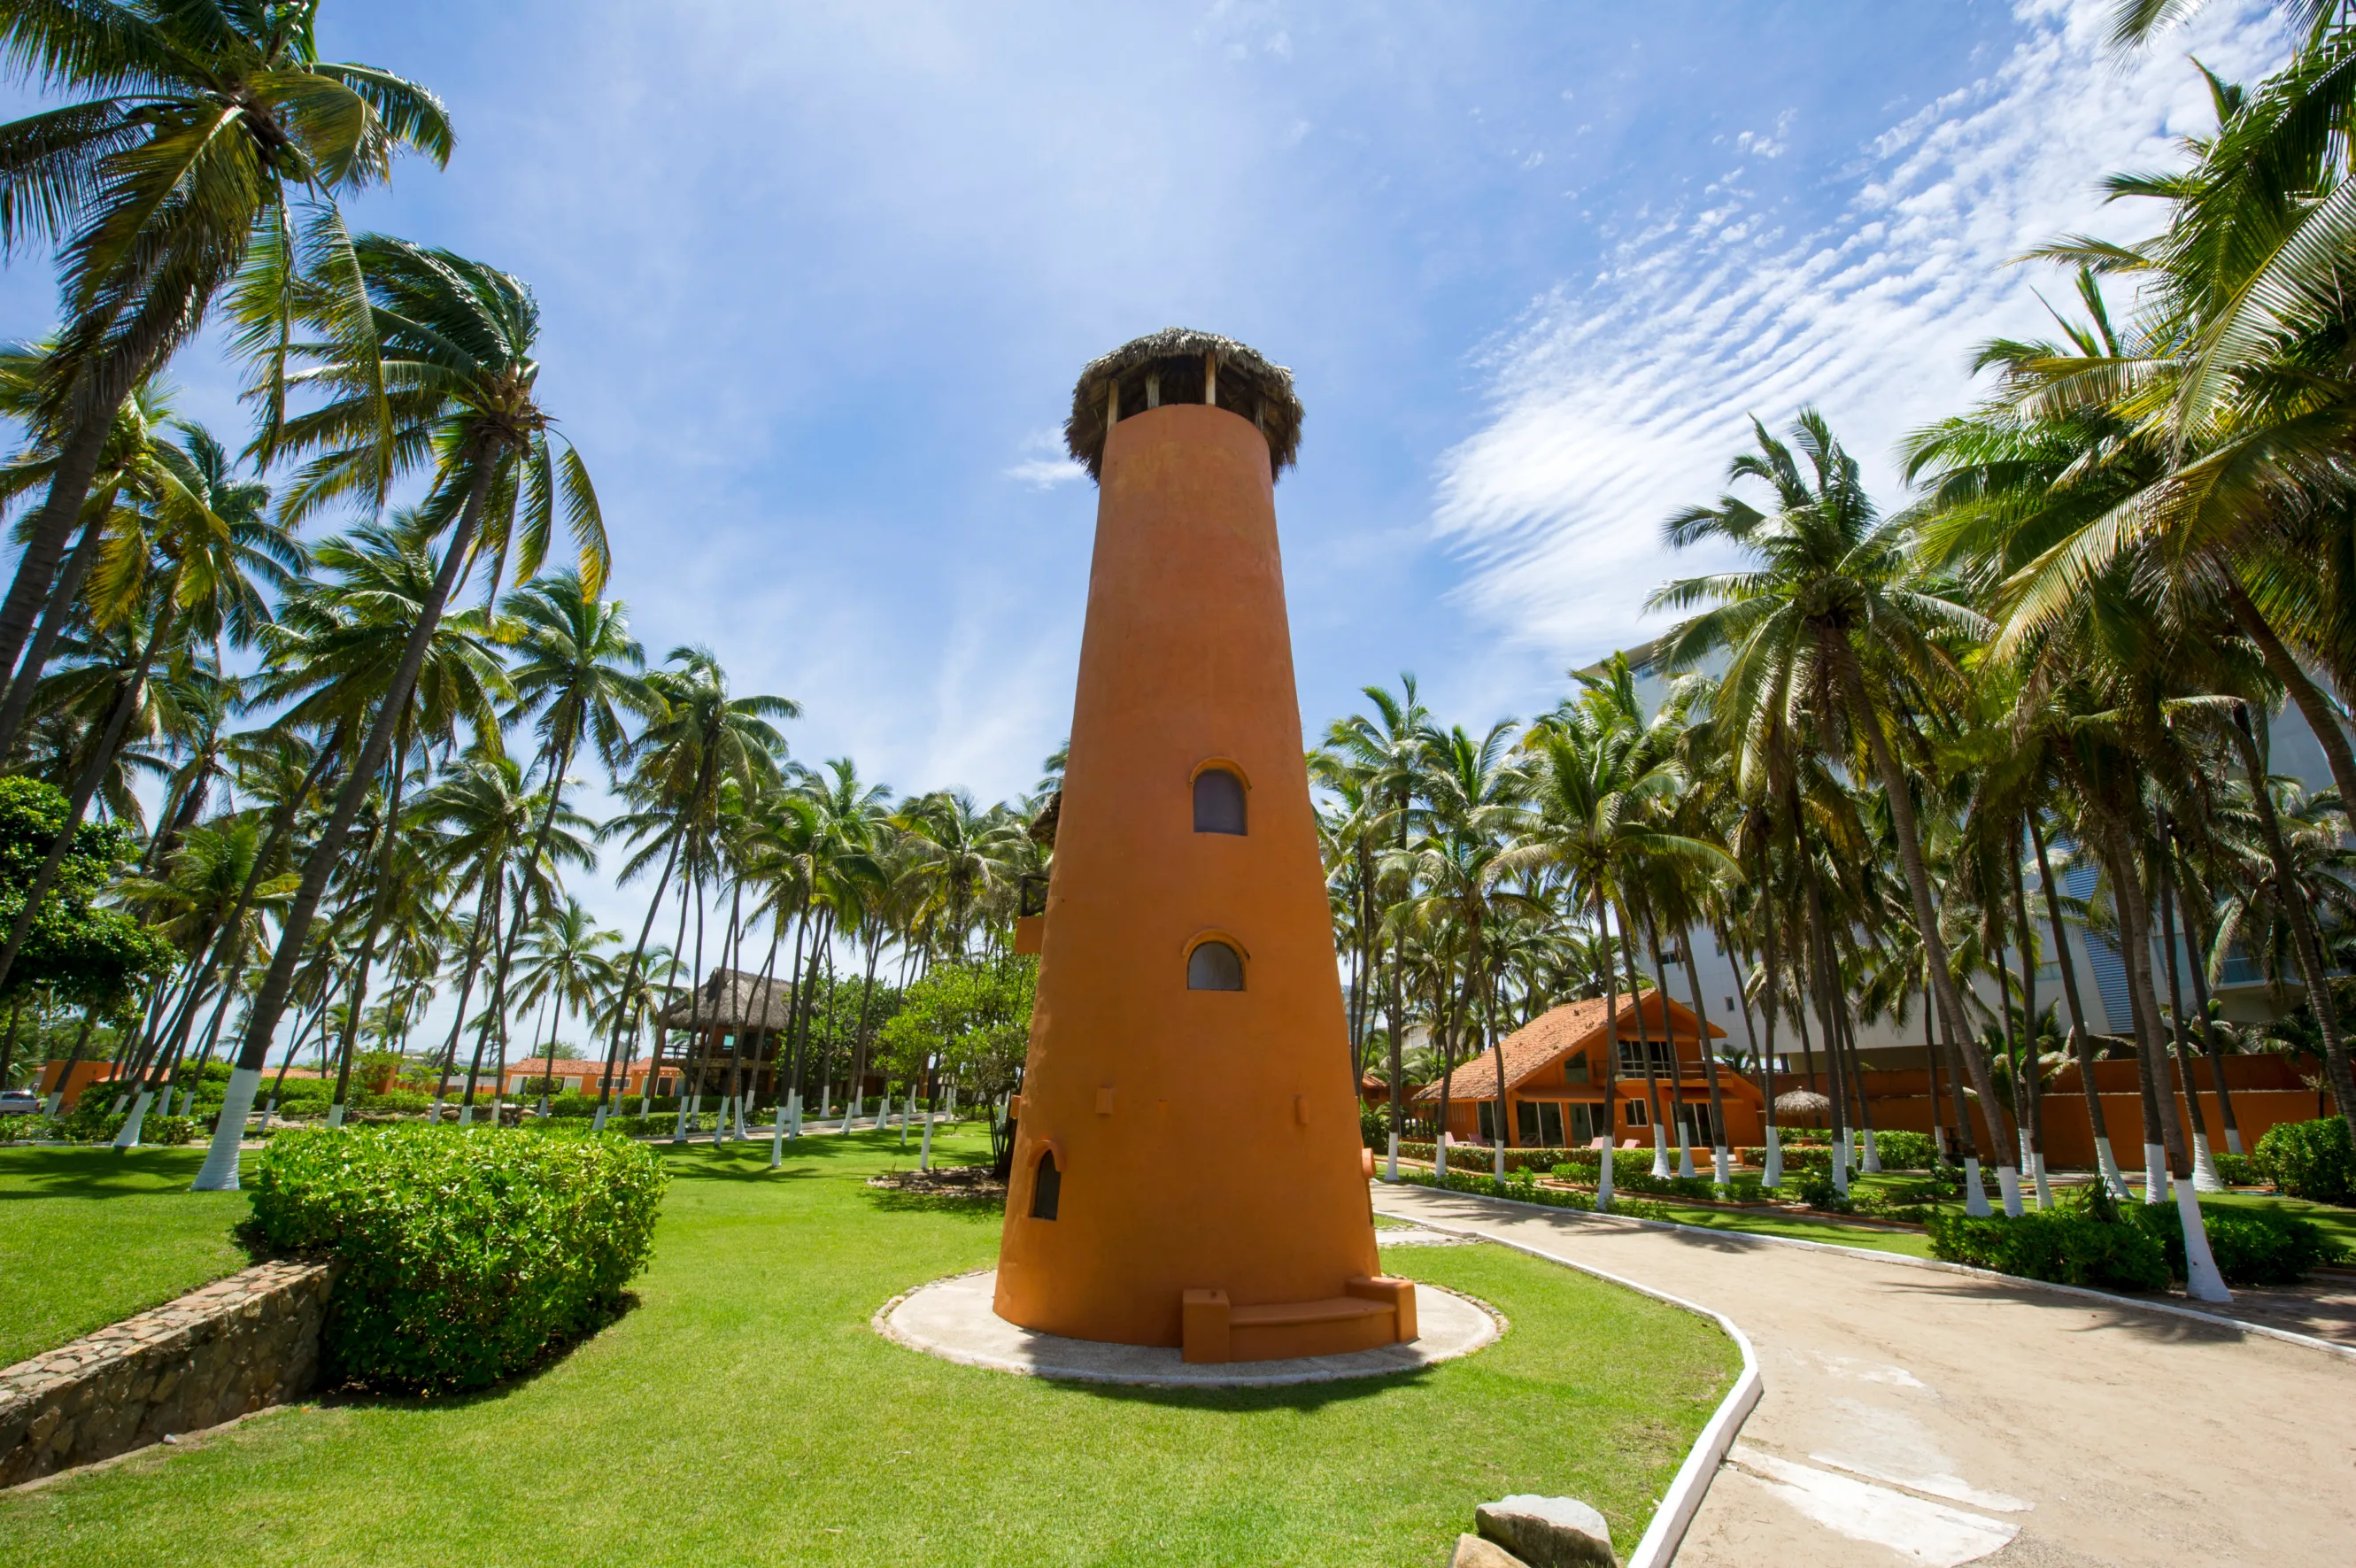 A clay faro surrounded by palm trees.